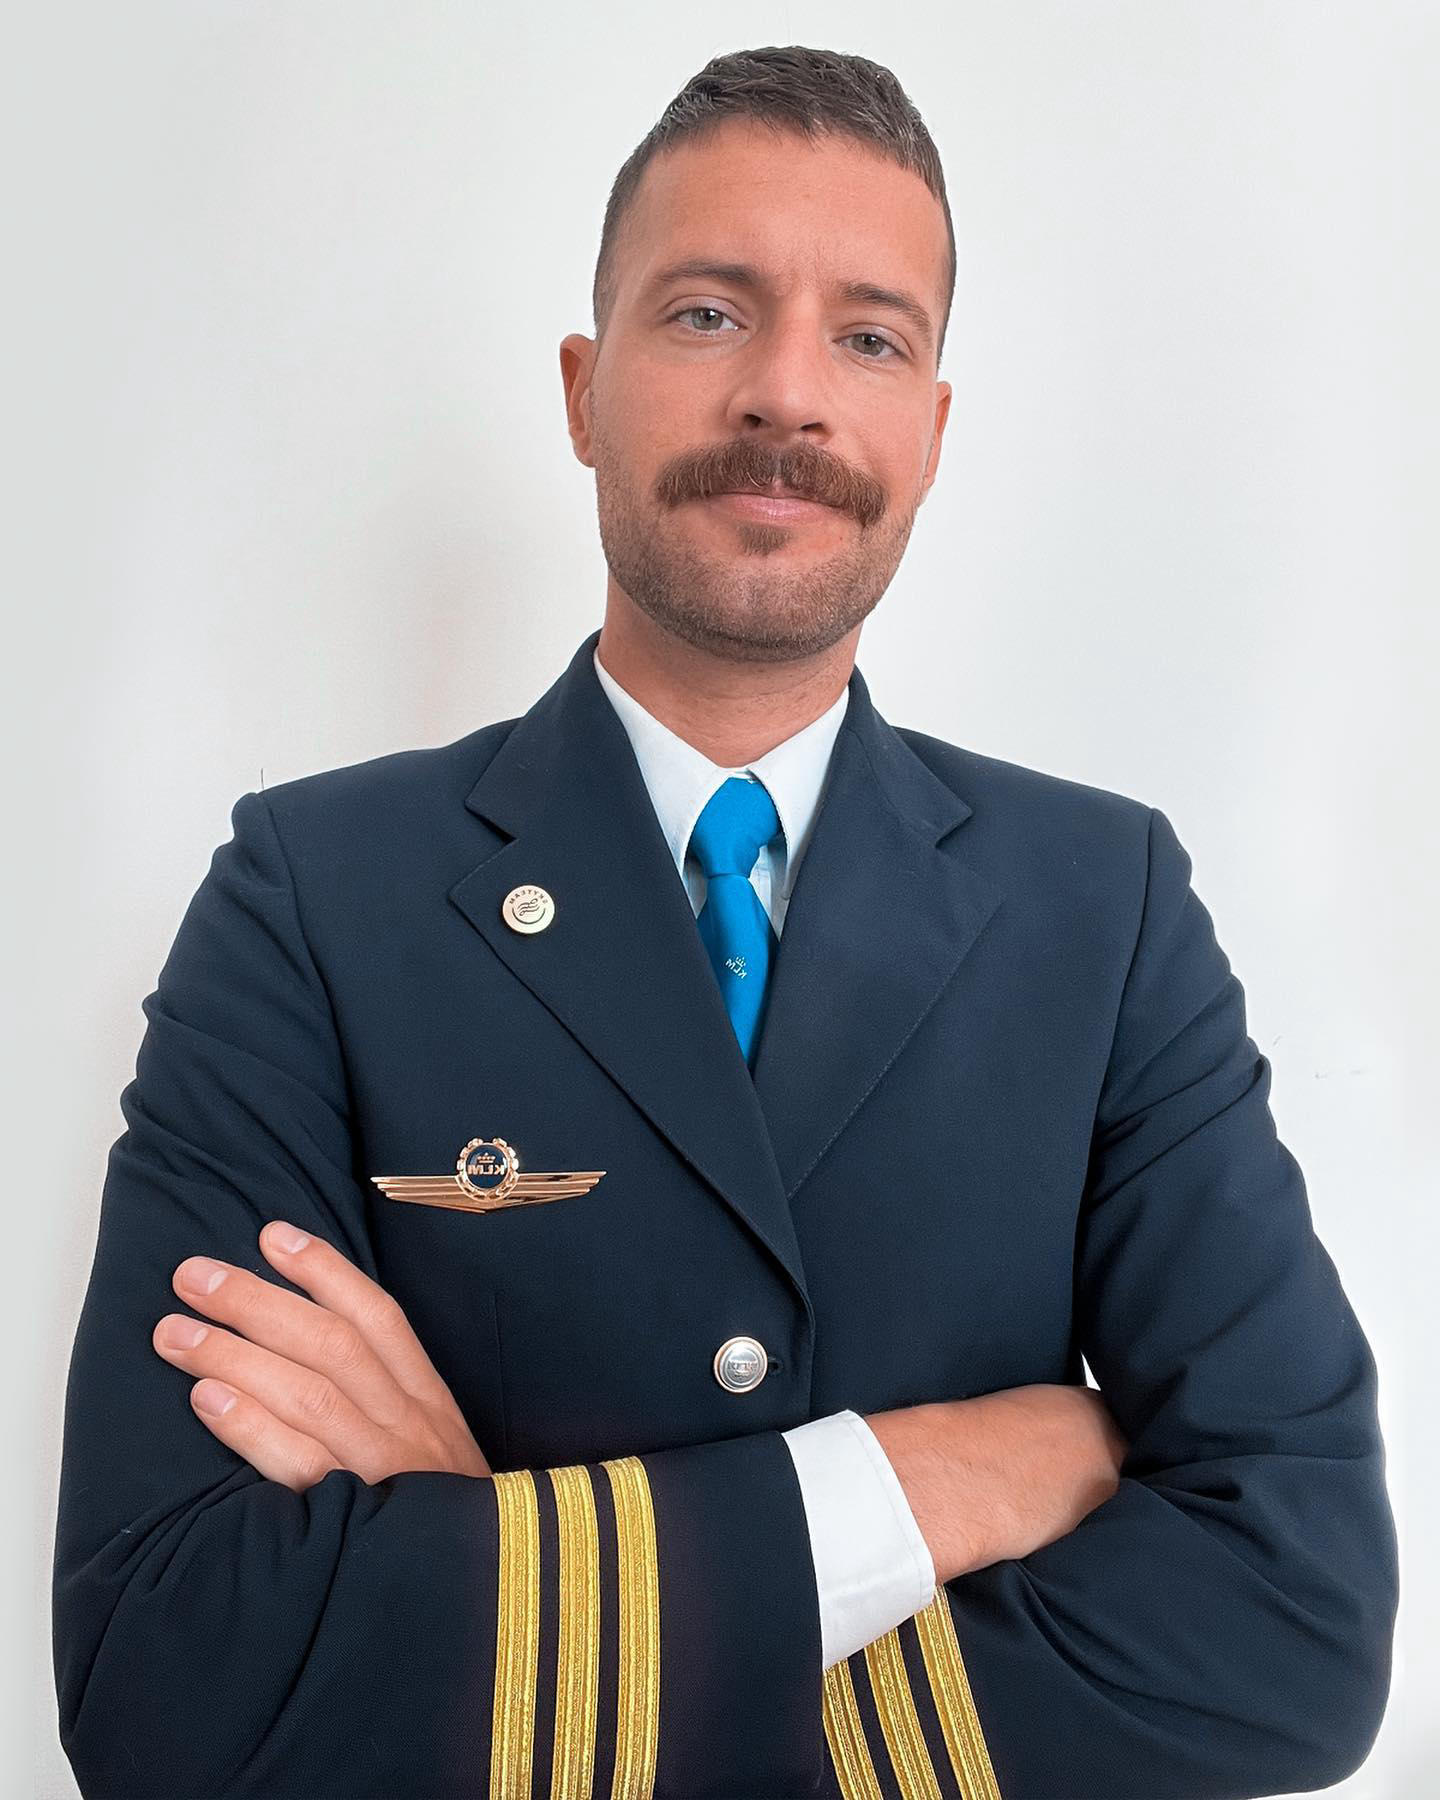 KLM Royal Dutch Airlines - Happy last day of Movember